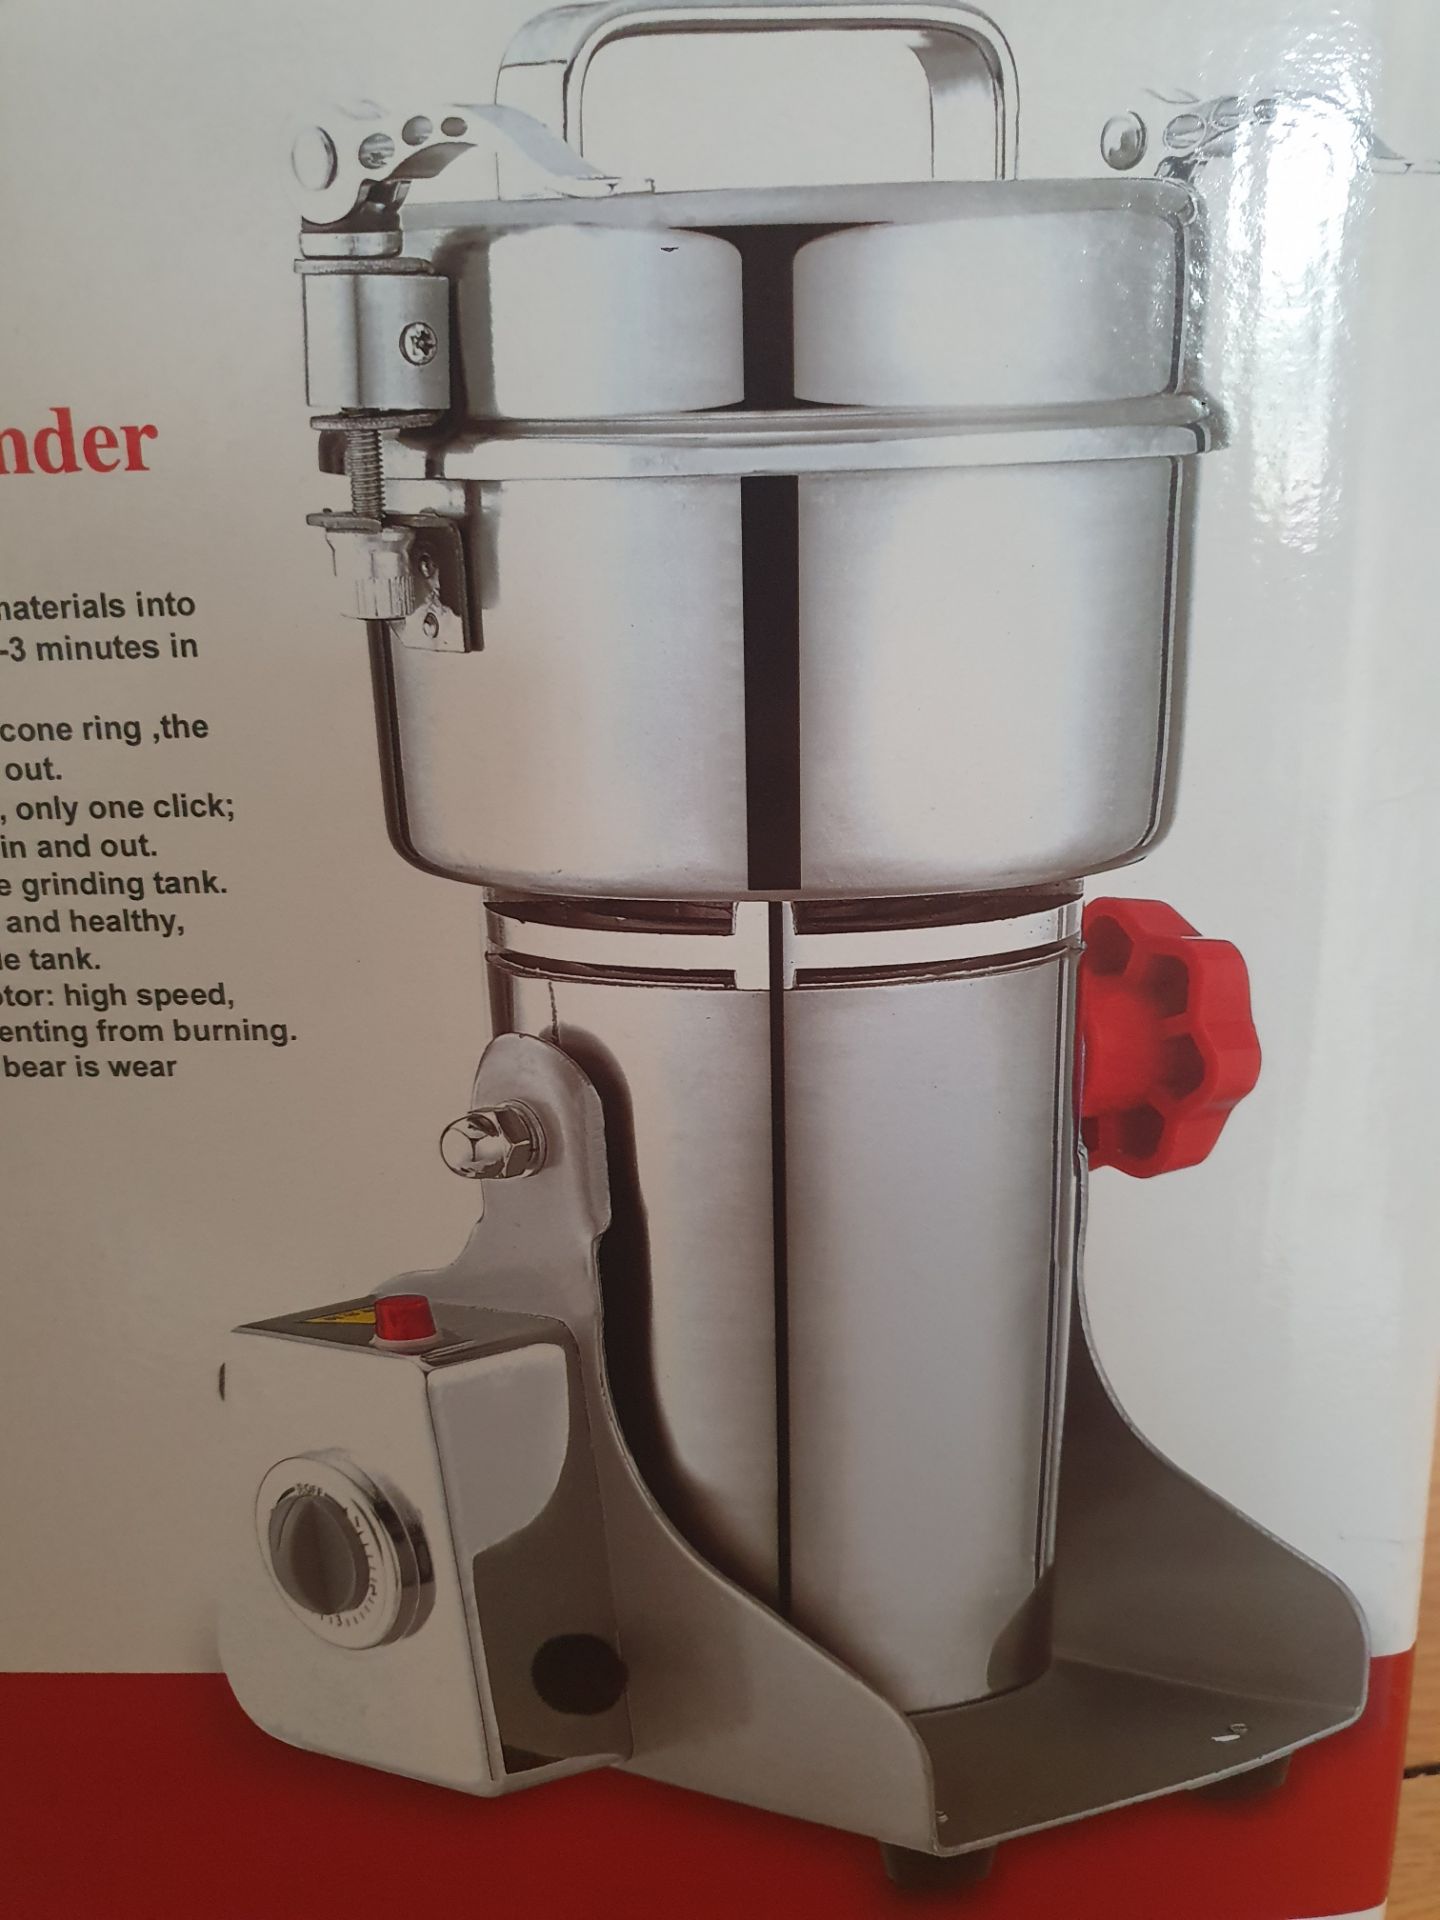 Large Grinder That Is Ideal For Nuts, Spices, Herbs and Even Coffee. - Image 7 of 8